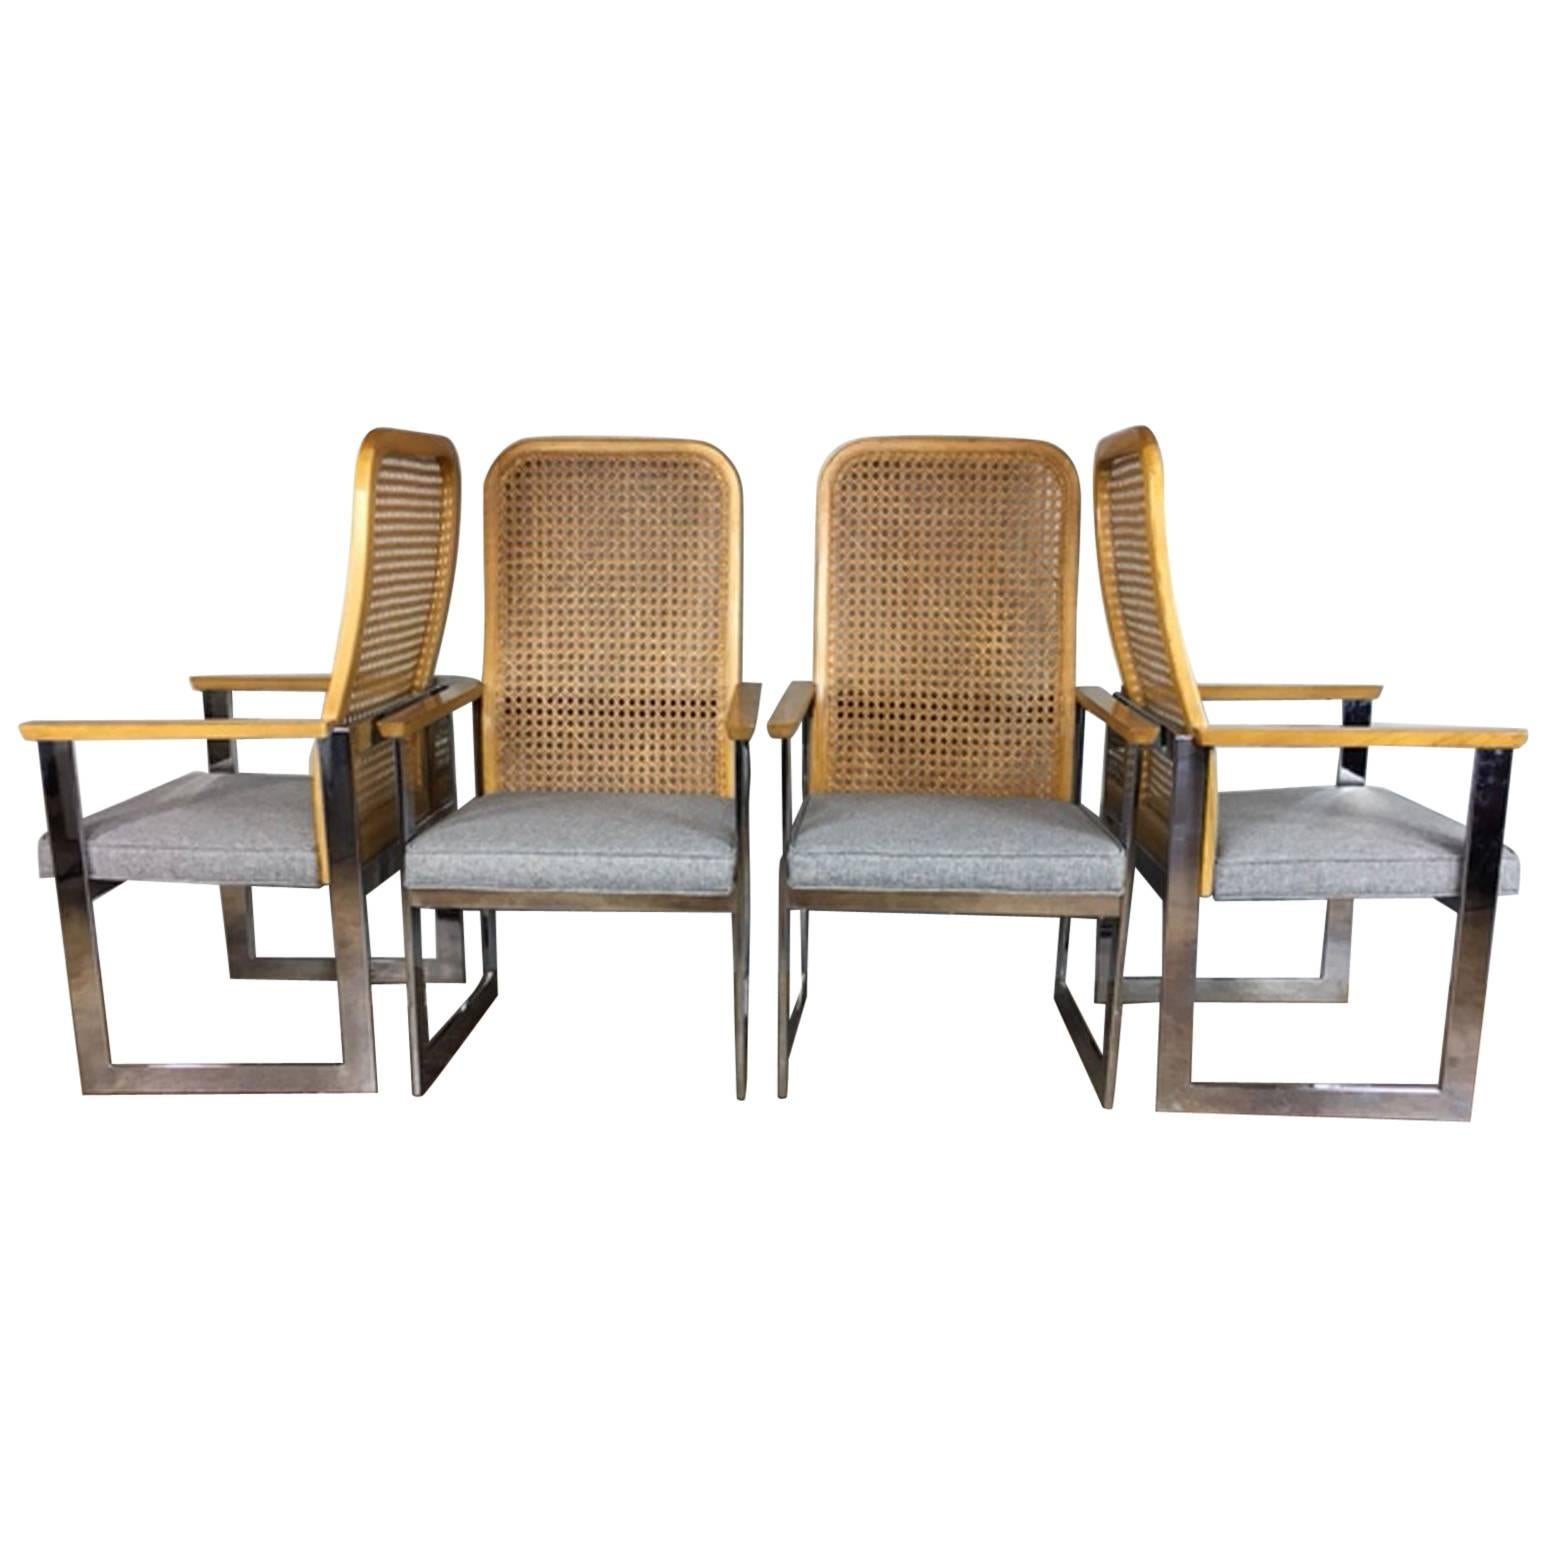 Milo Baughman Cane Back and Chrome Dining Chairs For Sale